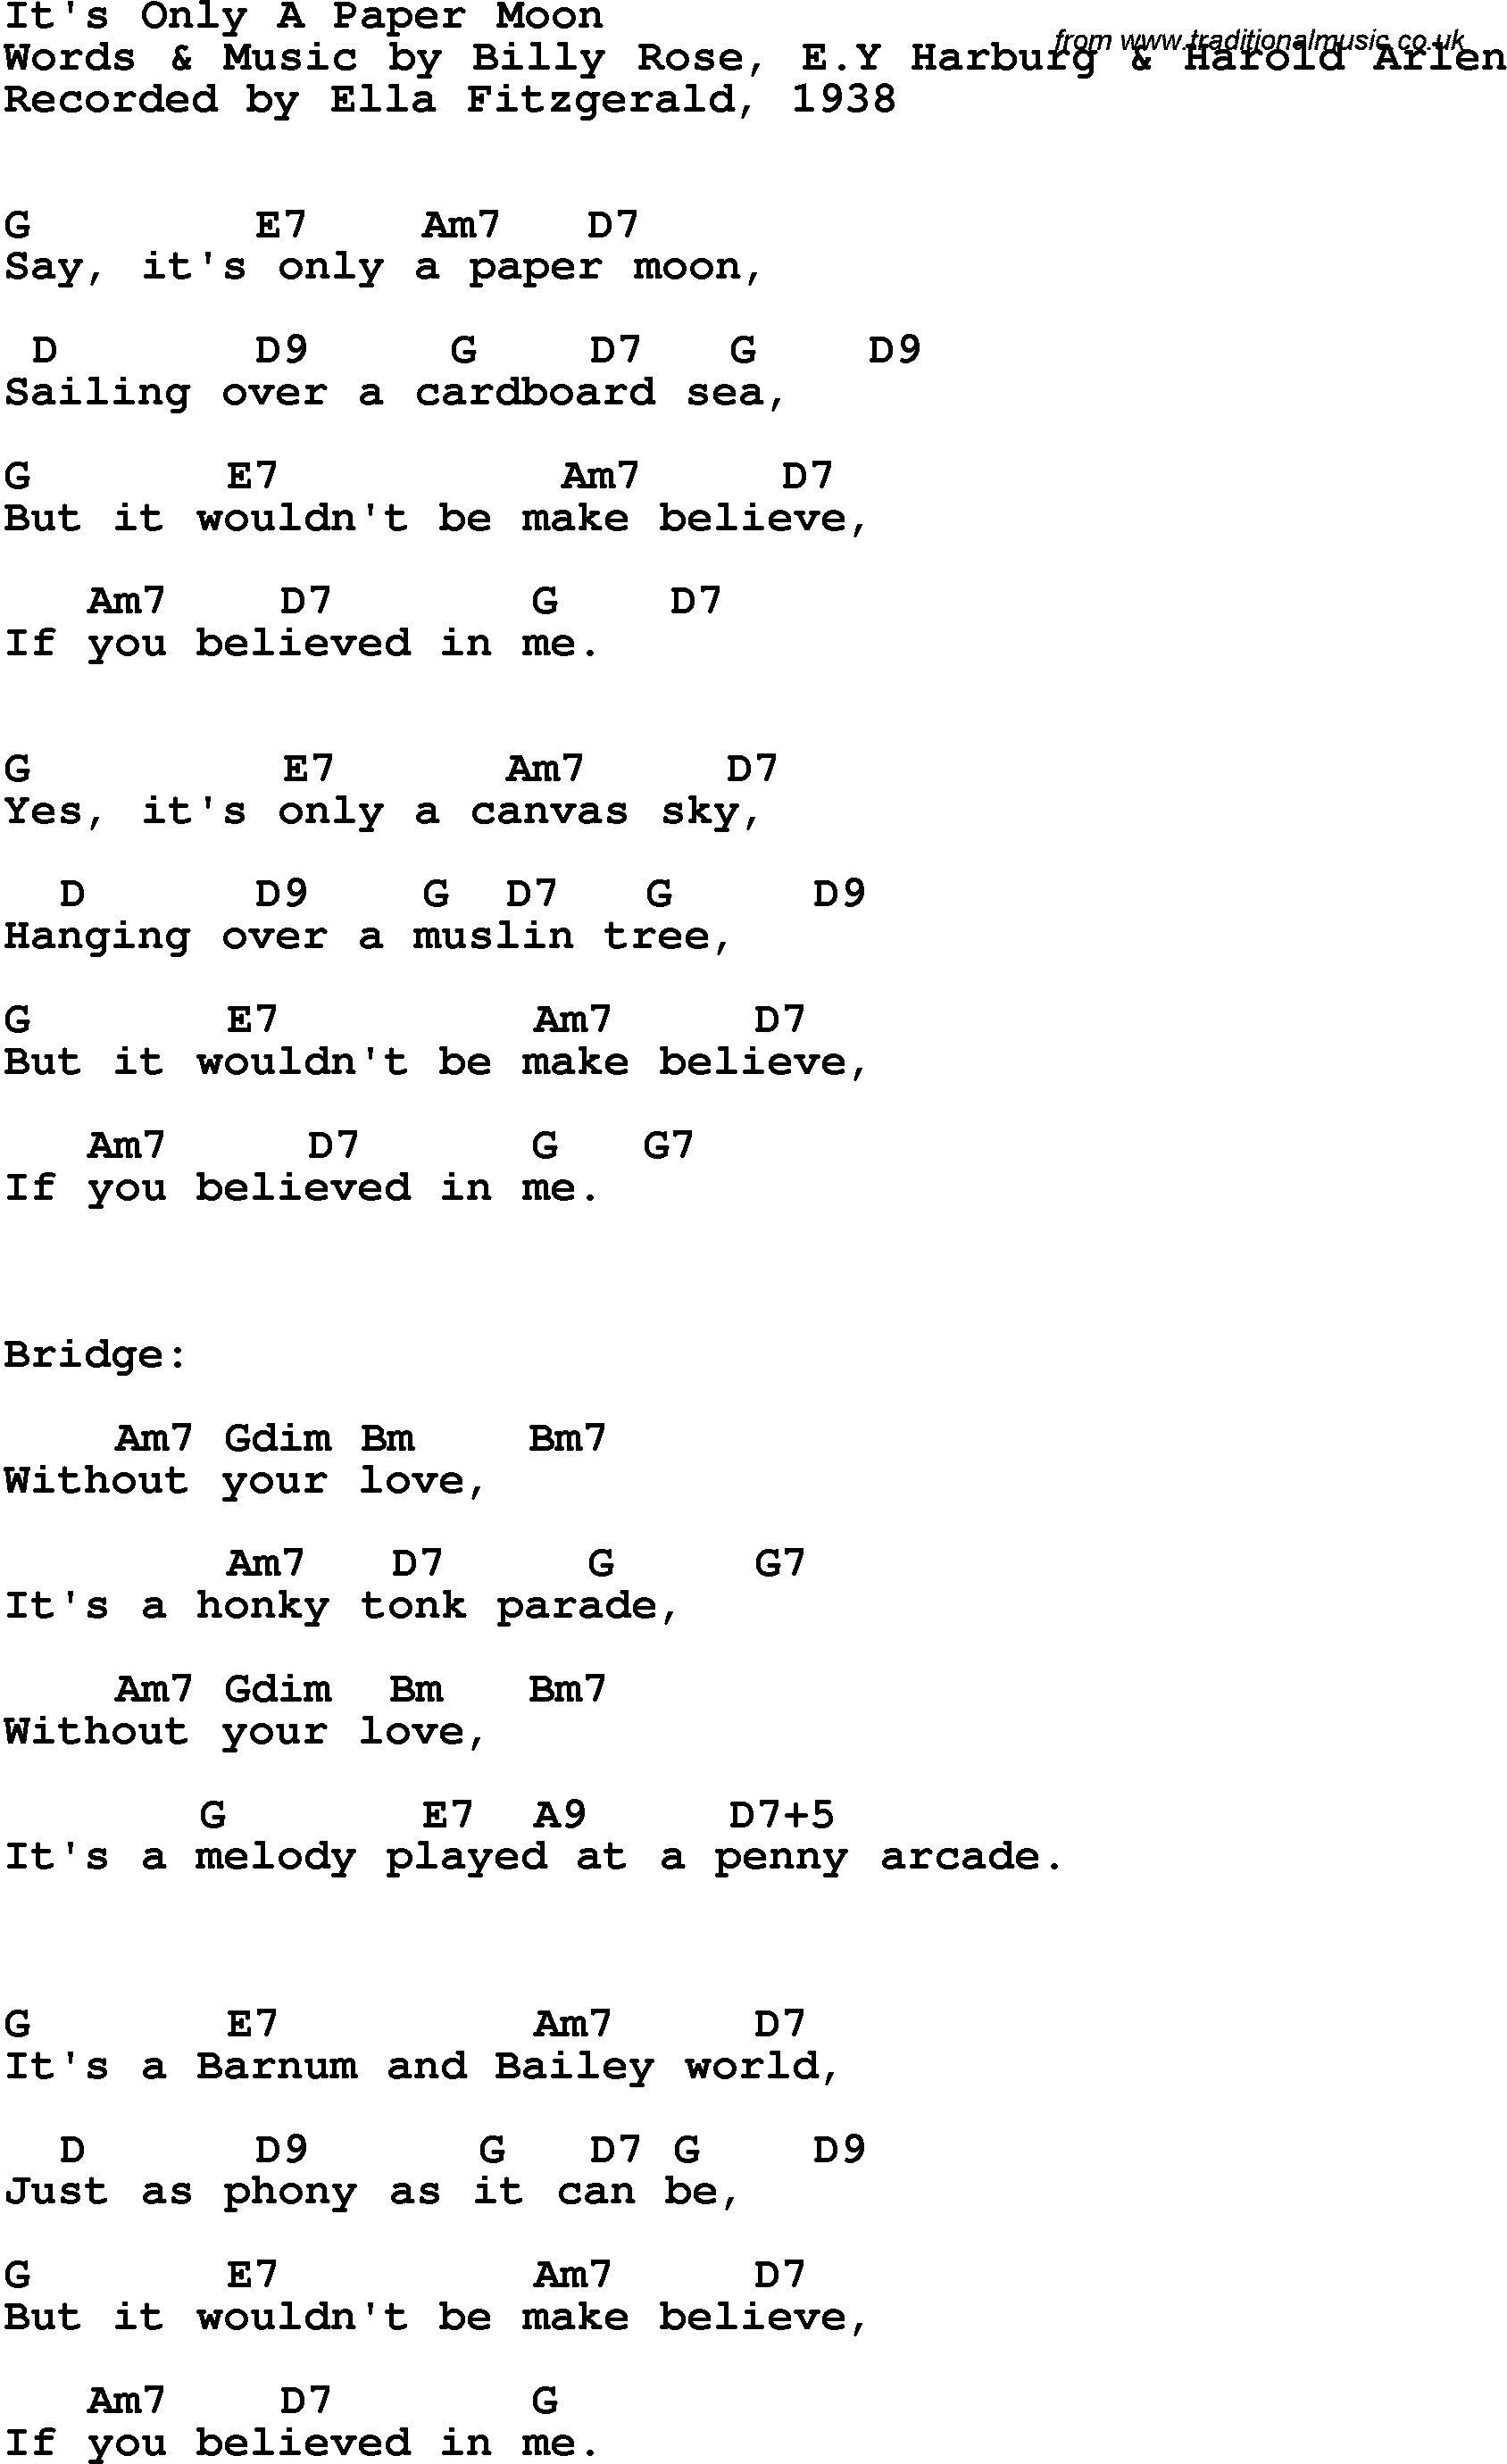 Song Lyrics with guitar chords for It's Only A Paper Moon - Ella Fitzgerald, 1938